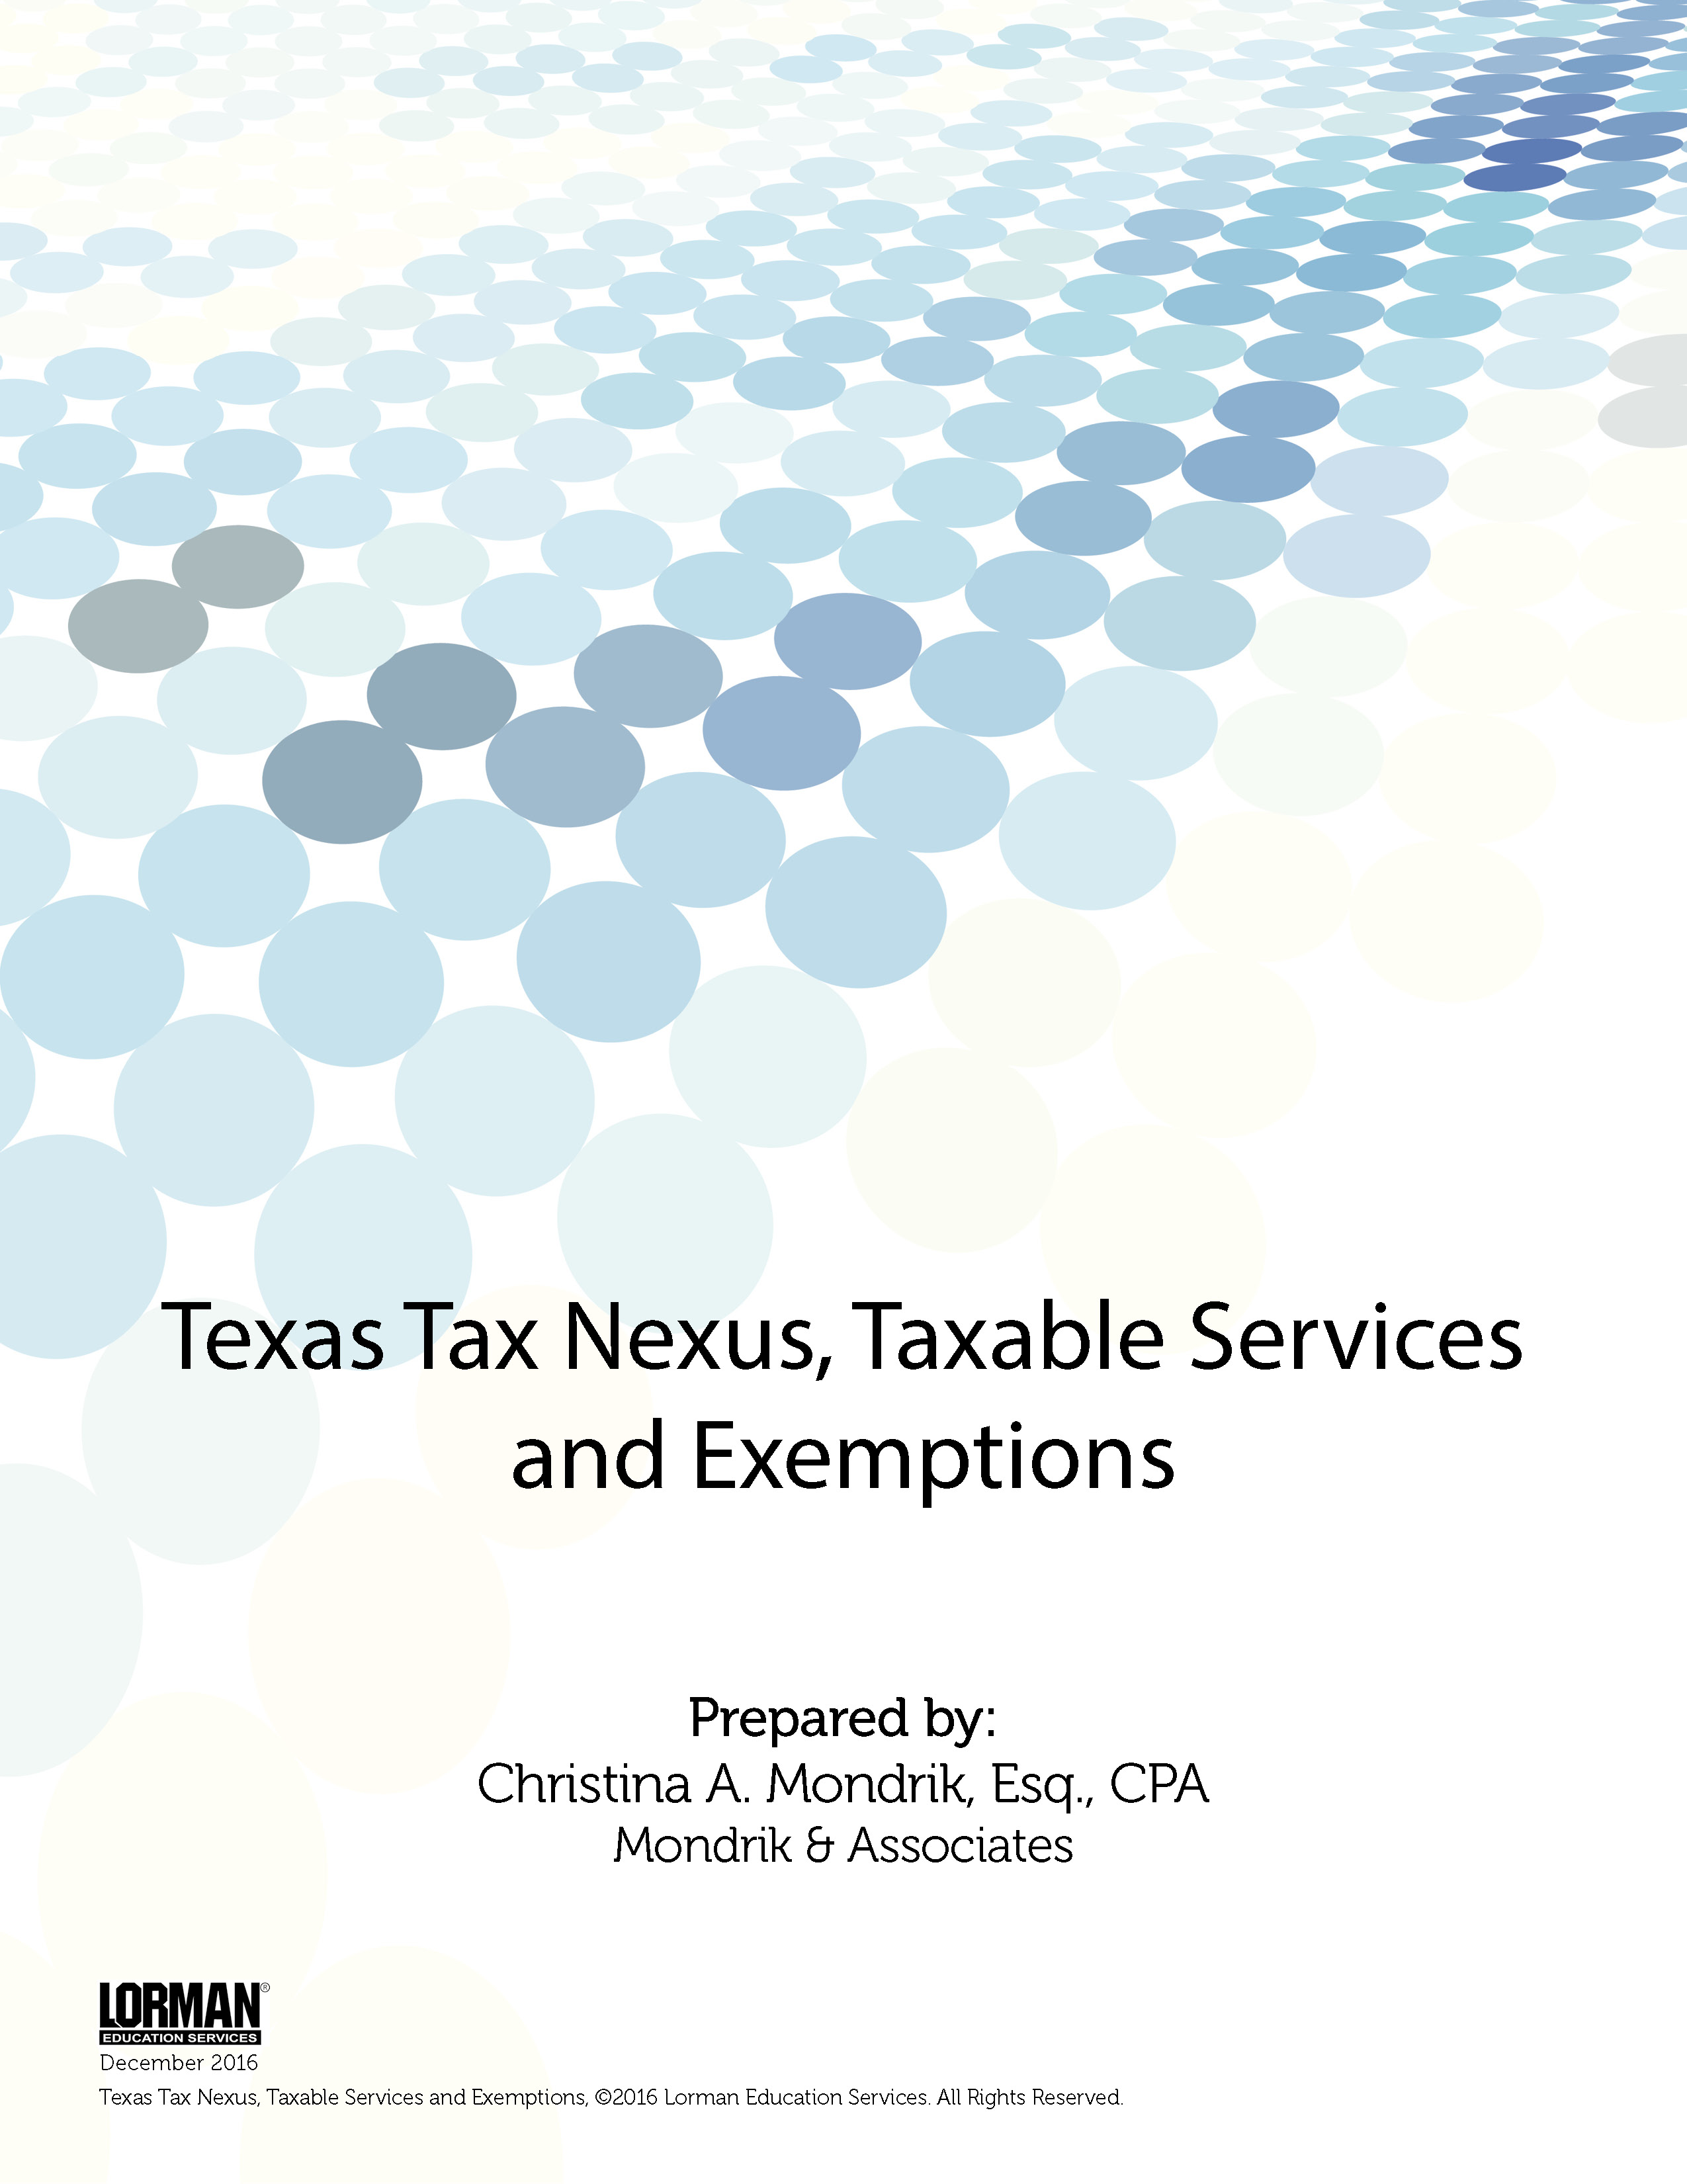 Texas Tax Nexus, Taxable Services and Exemptions